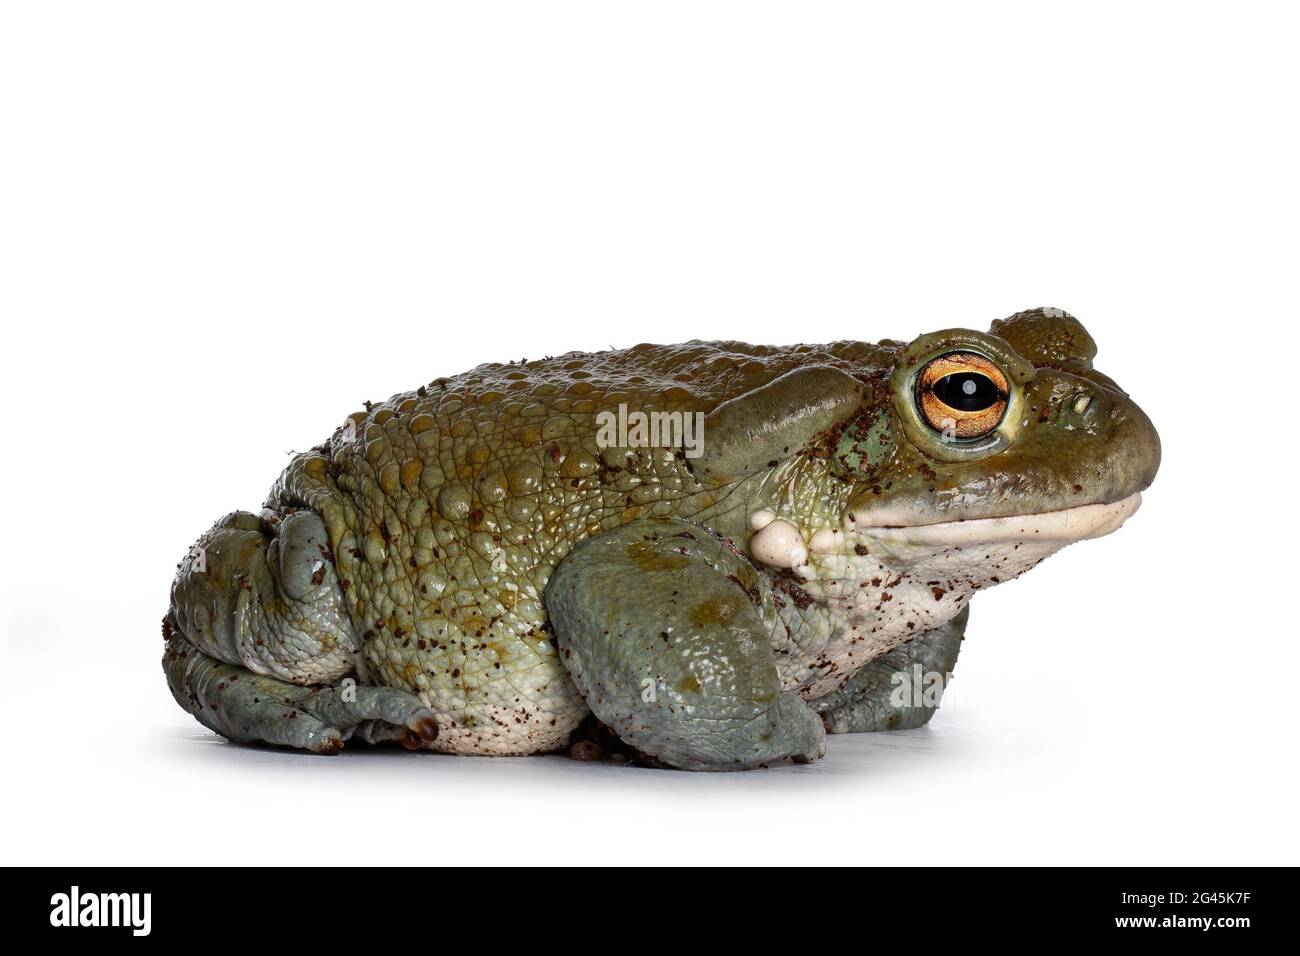 Bufo Alvarius aka Colorado River Toad, sitting side ways. Looking ahead with golden eyes. Isolated on white background. Stock Photo